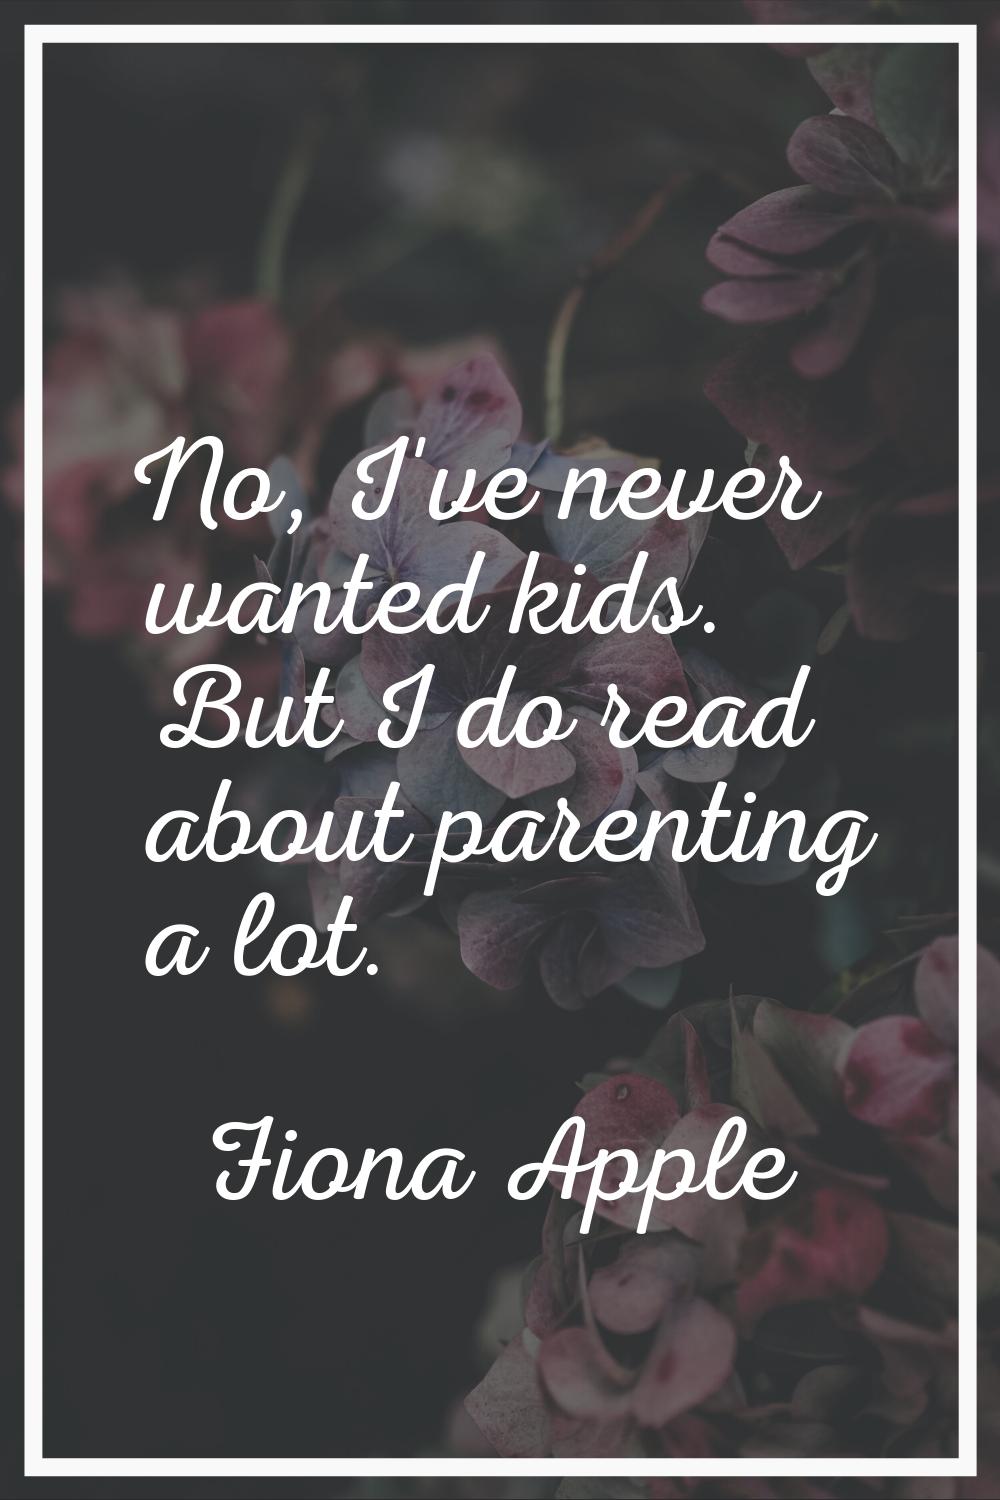 No, I've never wanted kids. But I do read about parenting a lot.